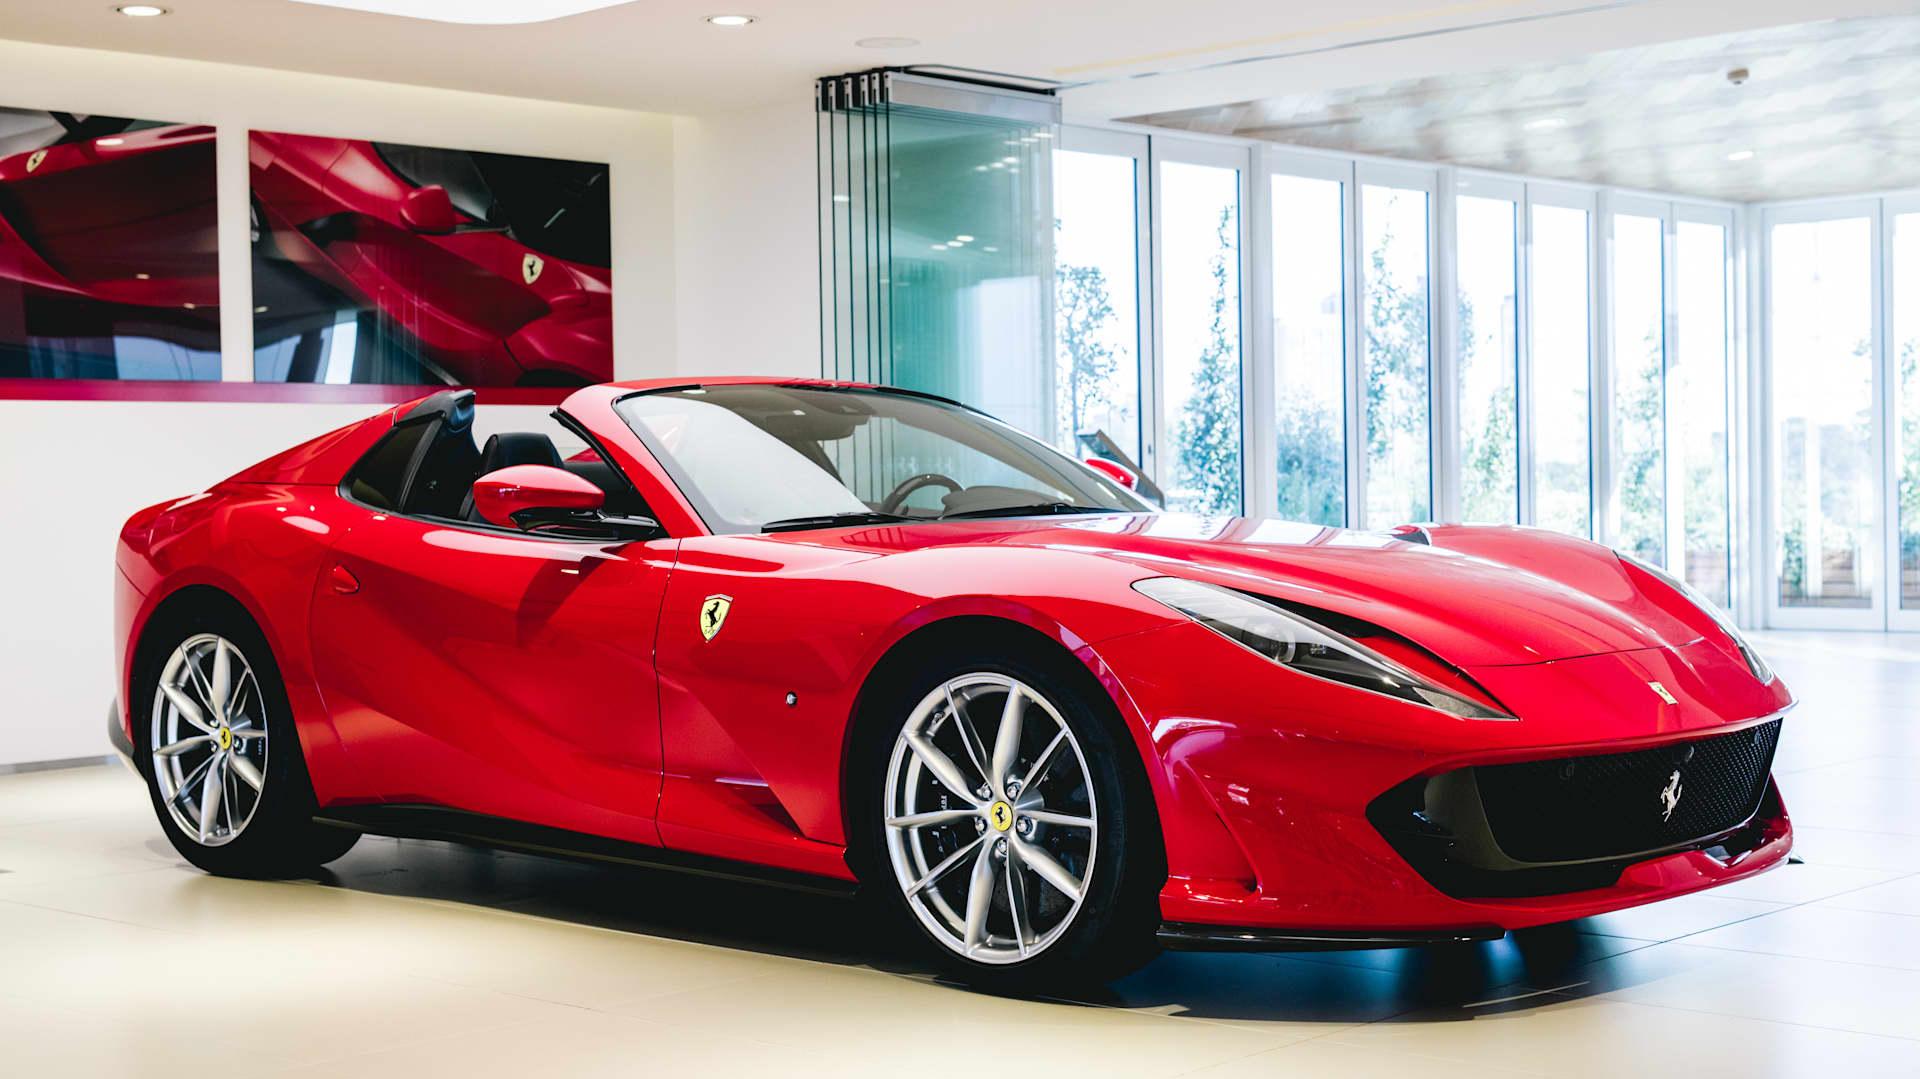 Ferrari Gts Spider V12 To Cost When It Arrives In